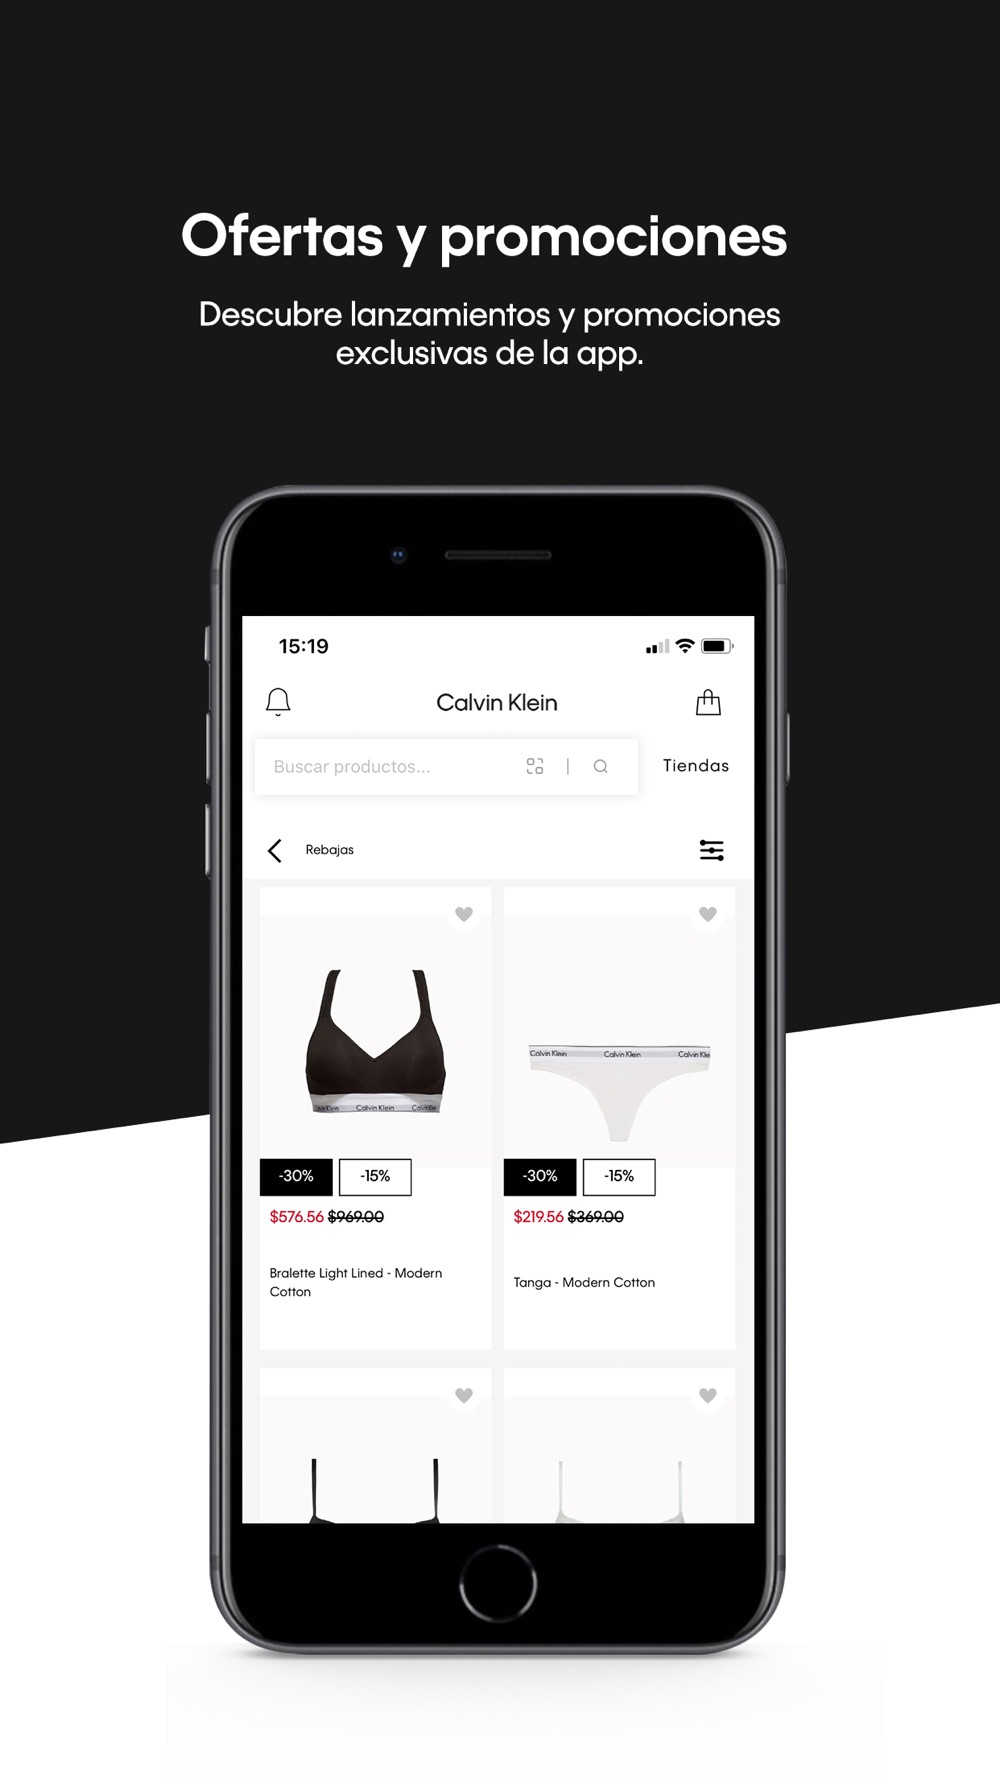 Calvin Klein Mx Free Download App for iPhone 